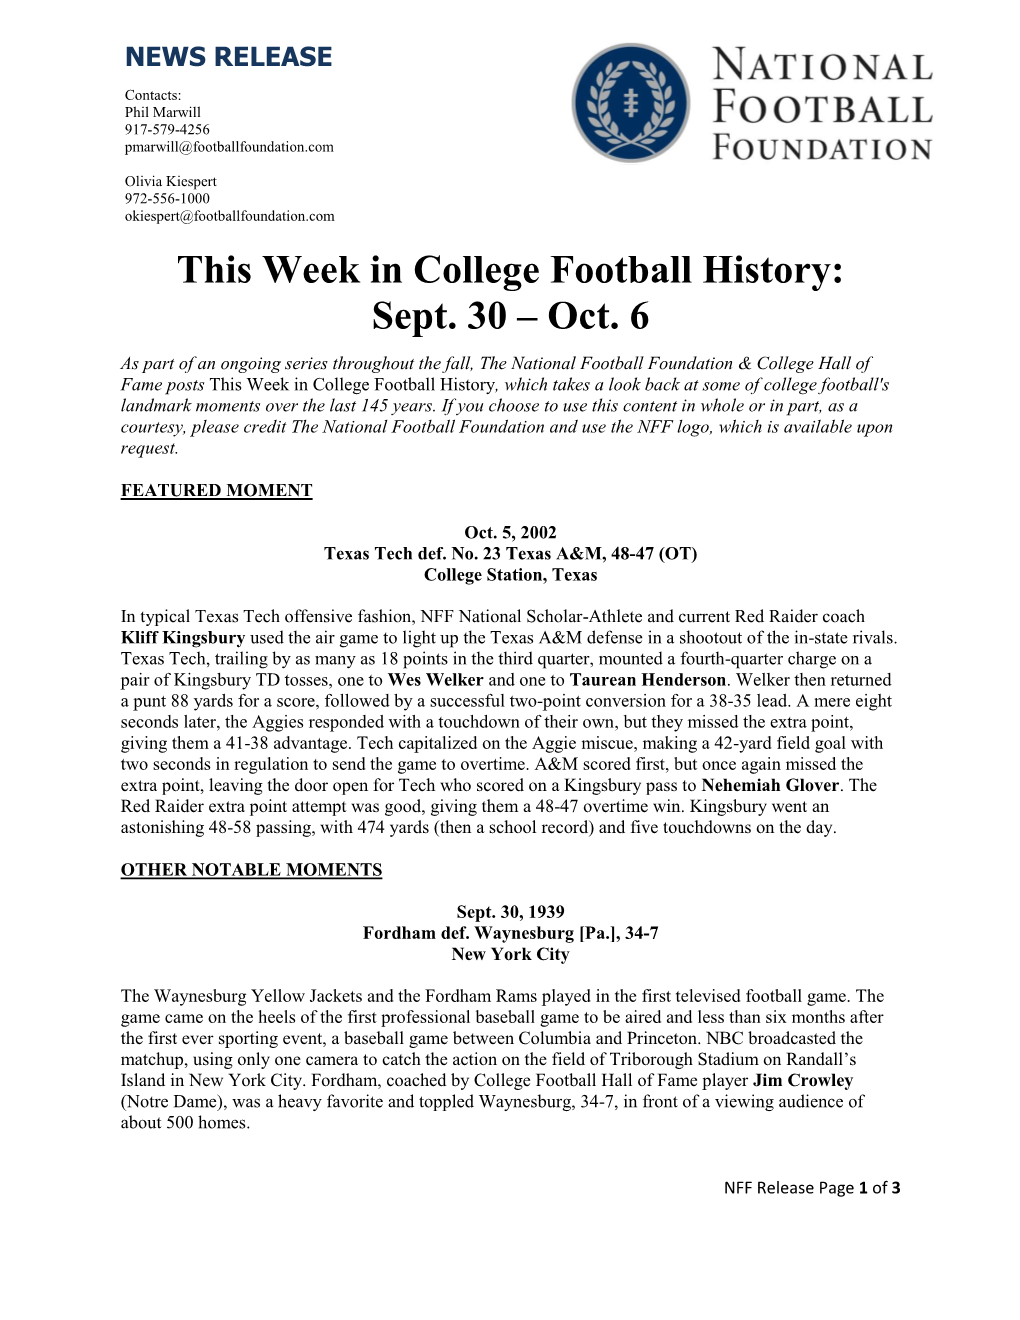 This Week in College Football History: Sept. 30 – Oct. 6